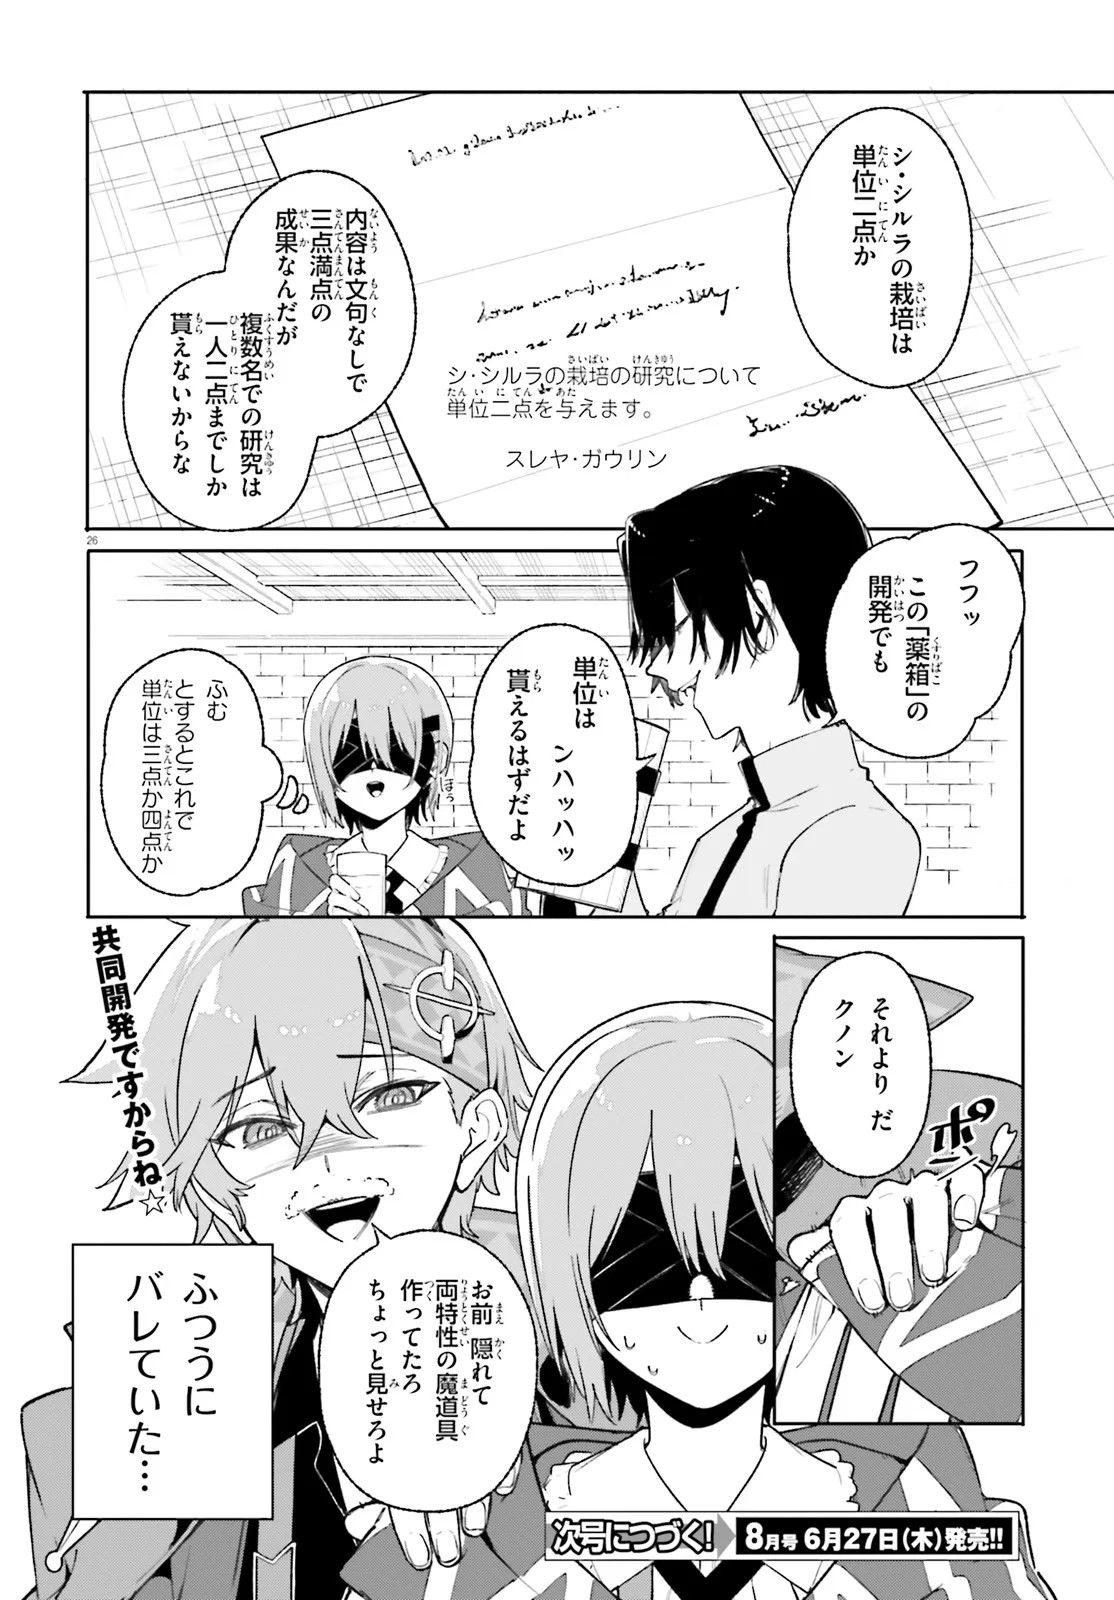 Kunon the Sorcerer Can See Kunon the Sorcerer Can See Through 魔術師クノンは見えている 第26.2話 - Page 16